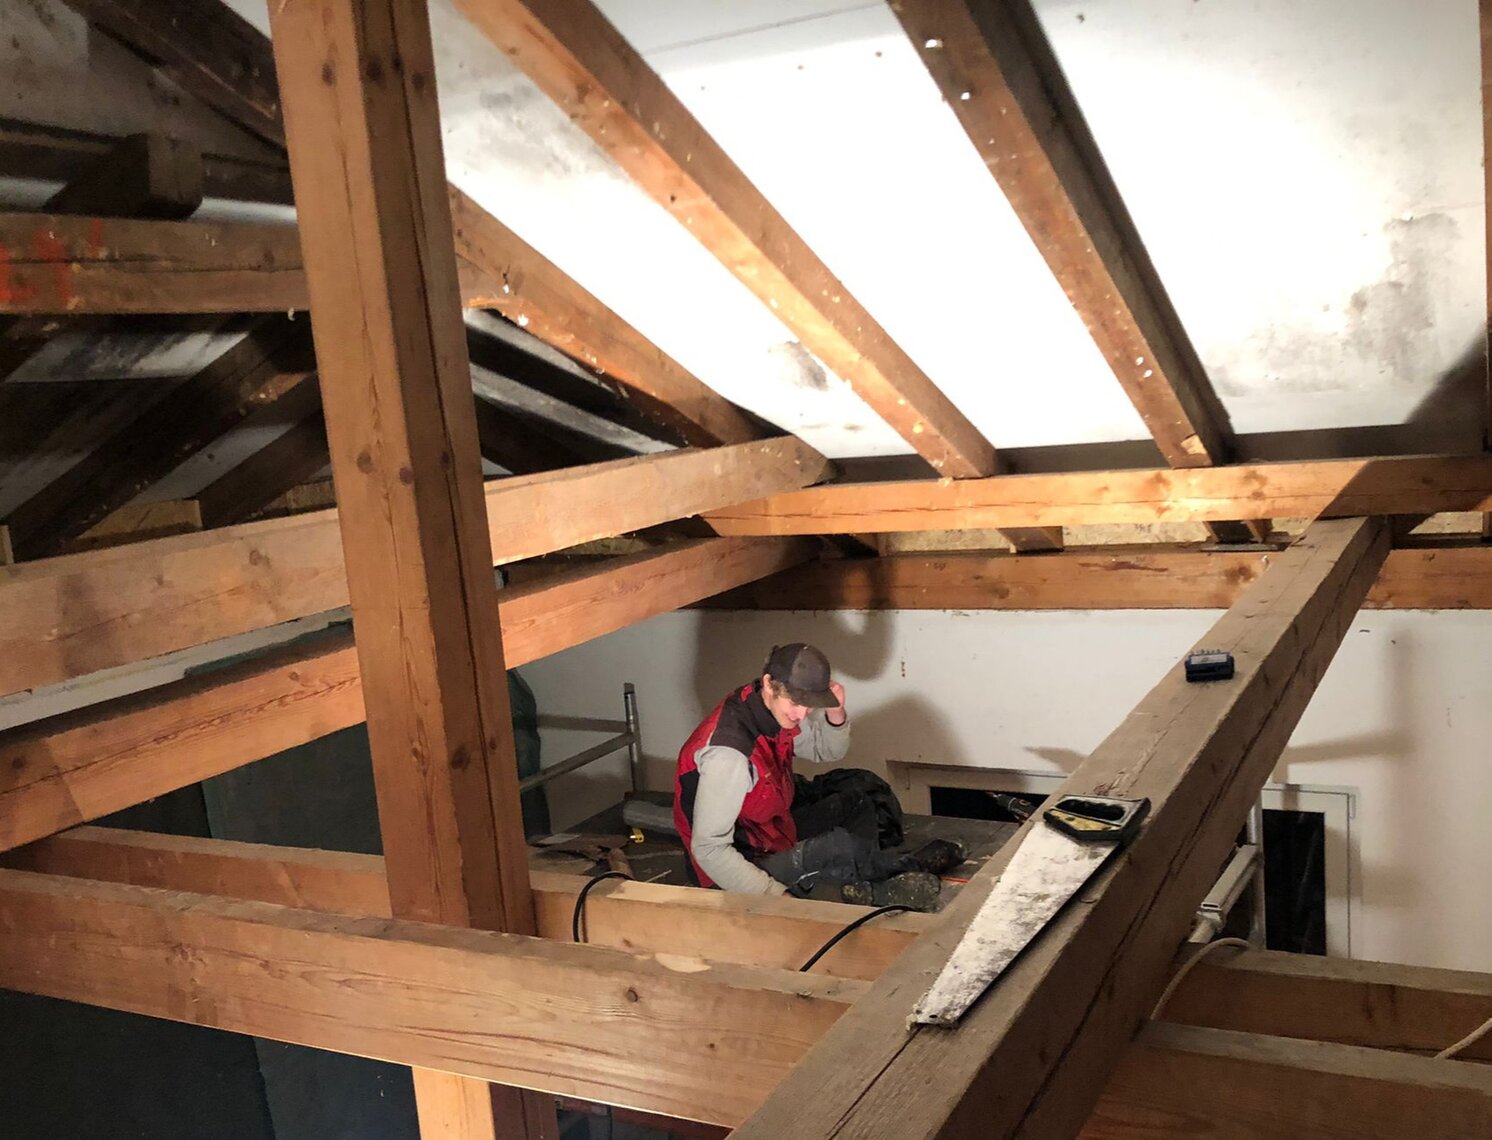 Photo of a person starting to renovate the roof trusses